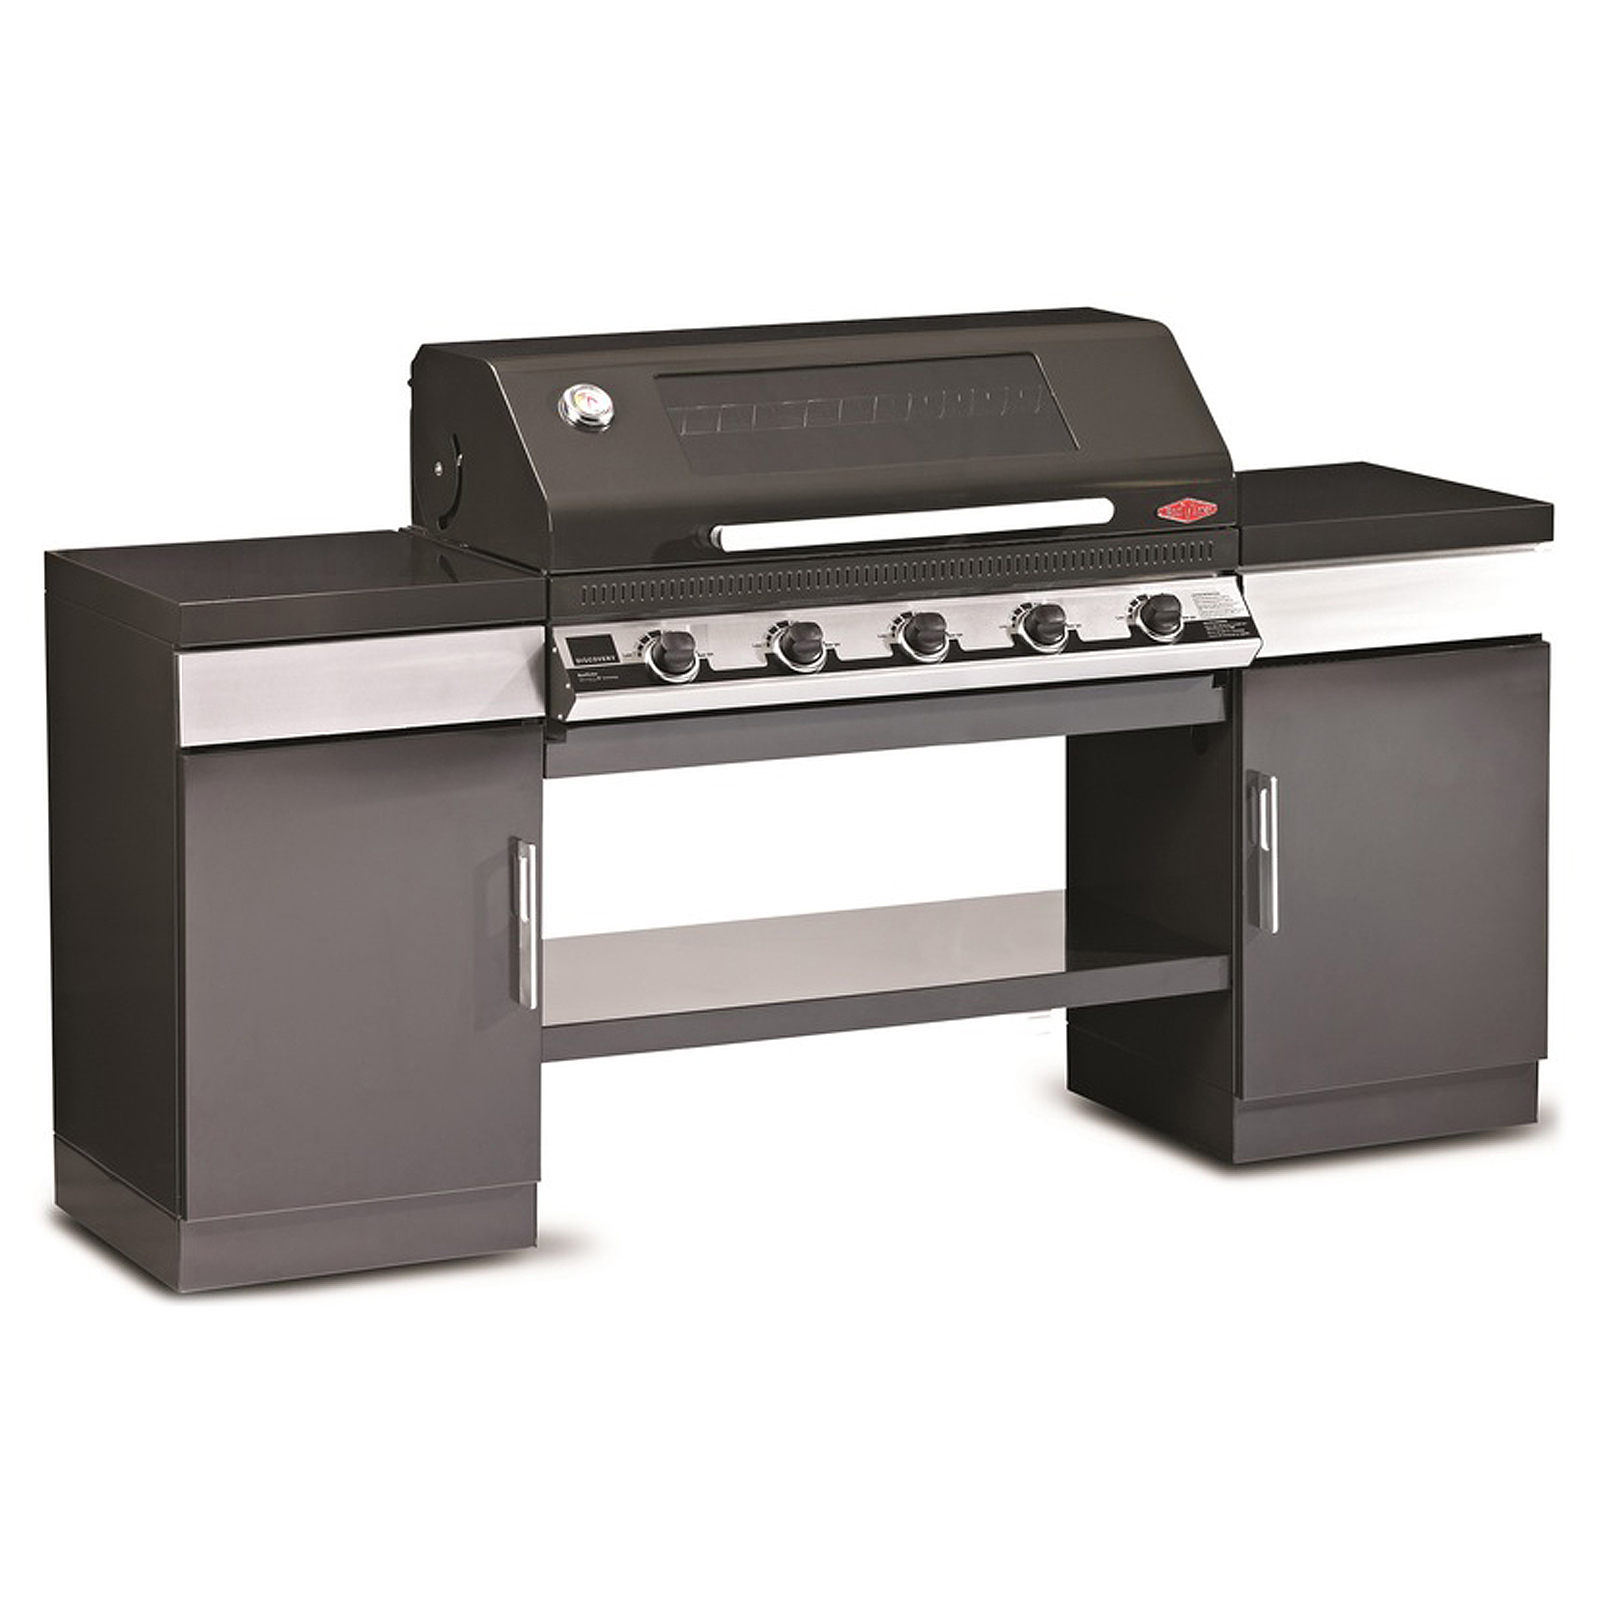 BeefEater 5 Burner Enamel Discovery 1100E Outdoor Kitchen